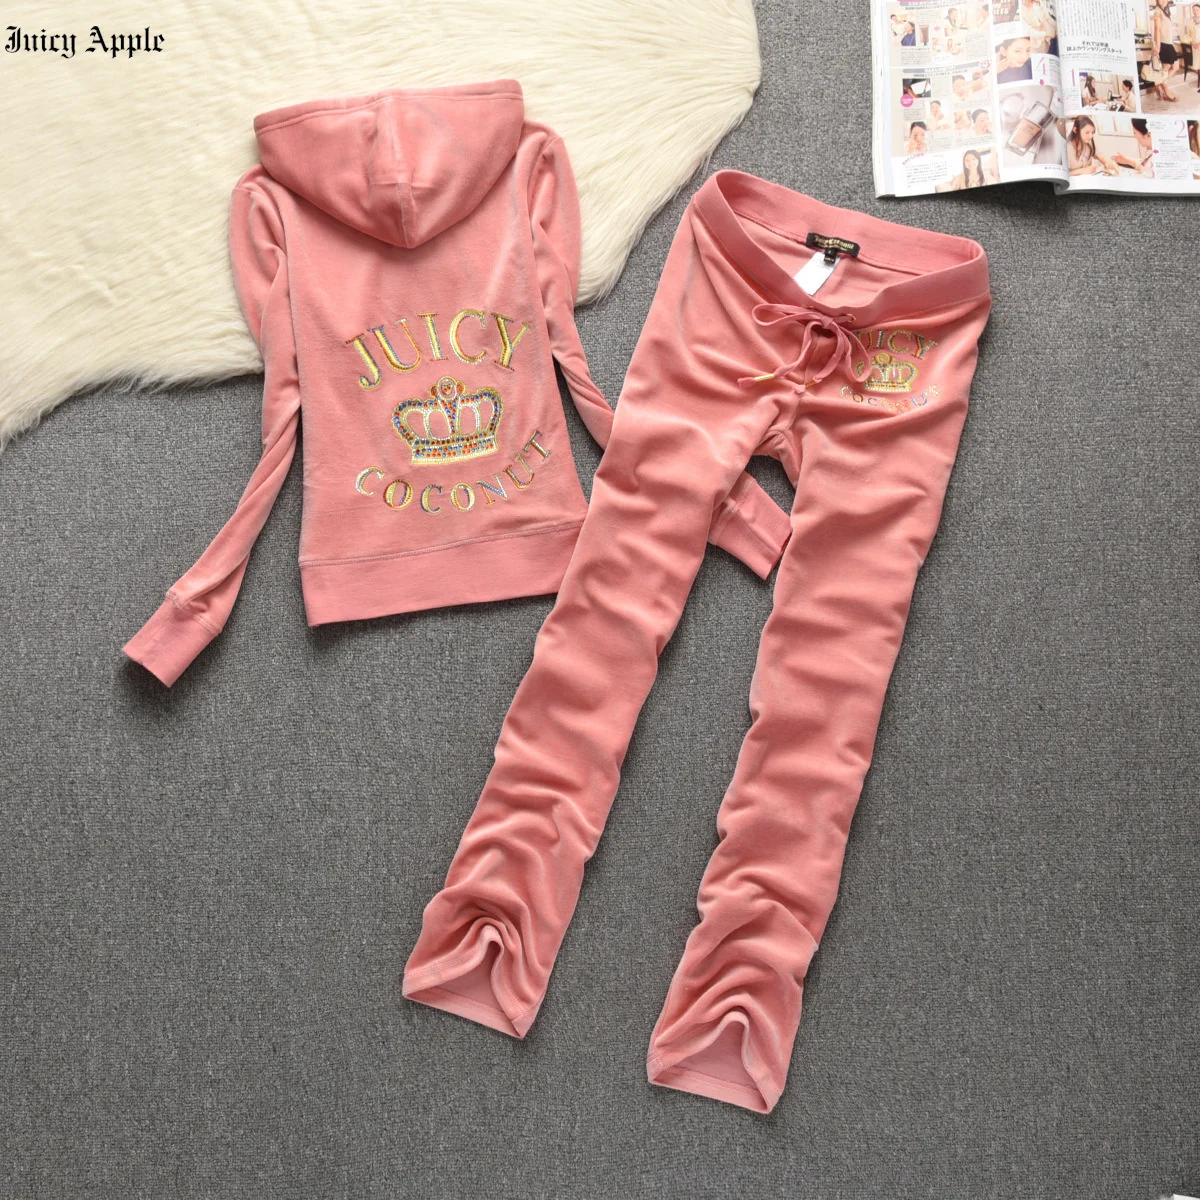 Juicy Apple Tracksuit Woman's Velvet 2023 New Fabric Tracksuits Velor Suit Zipper Hoodies And Pants 2 Piece Sets Womens Outfits